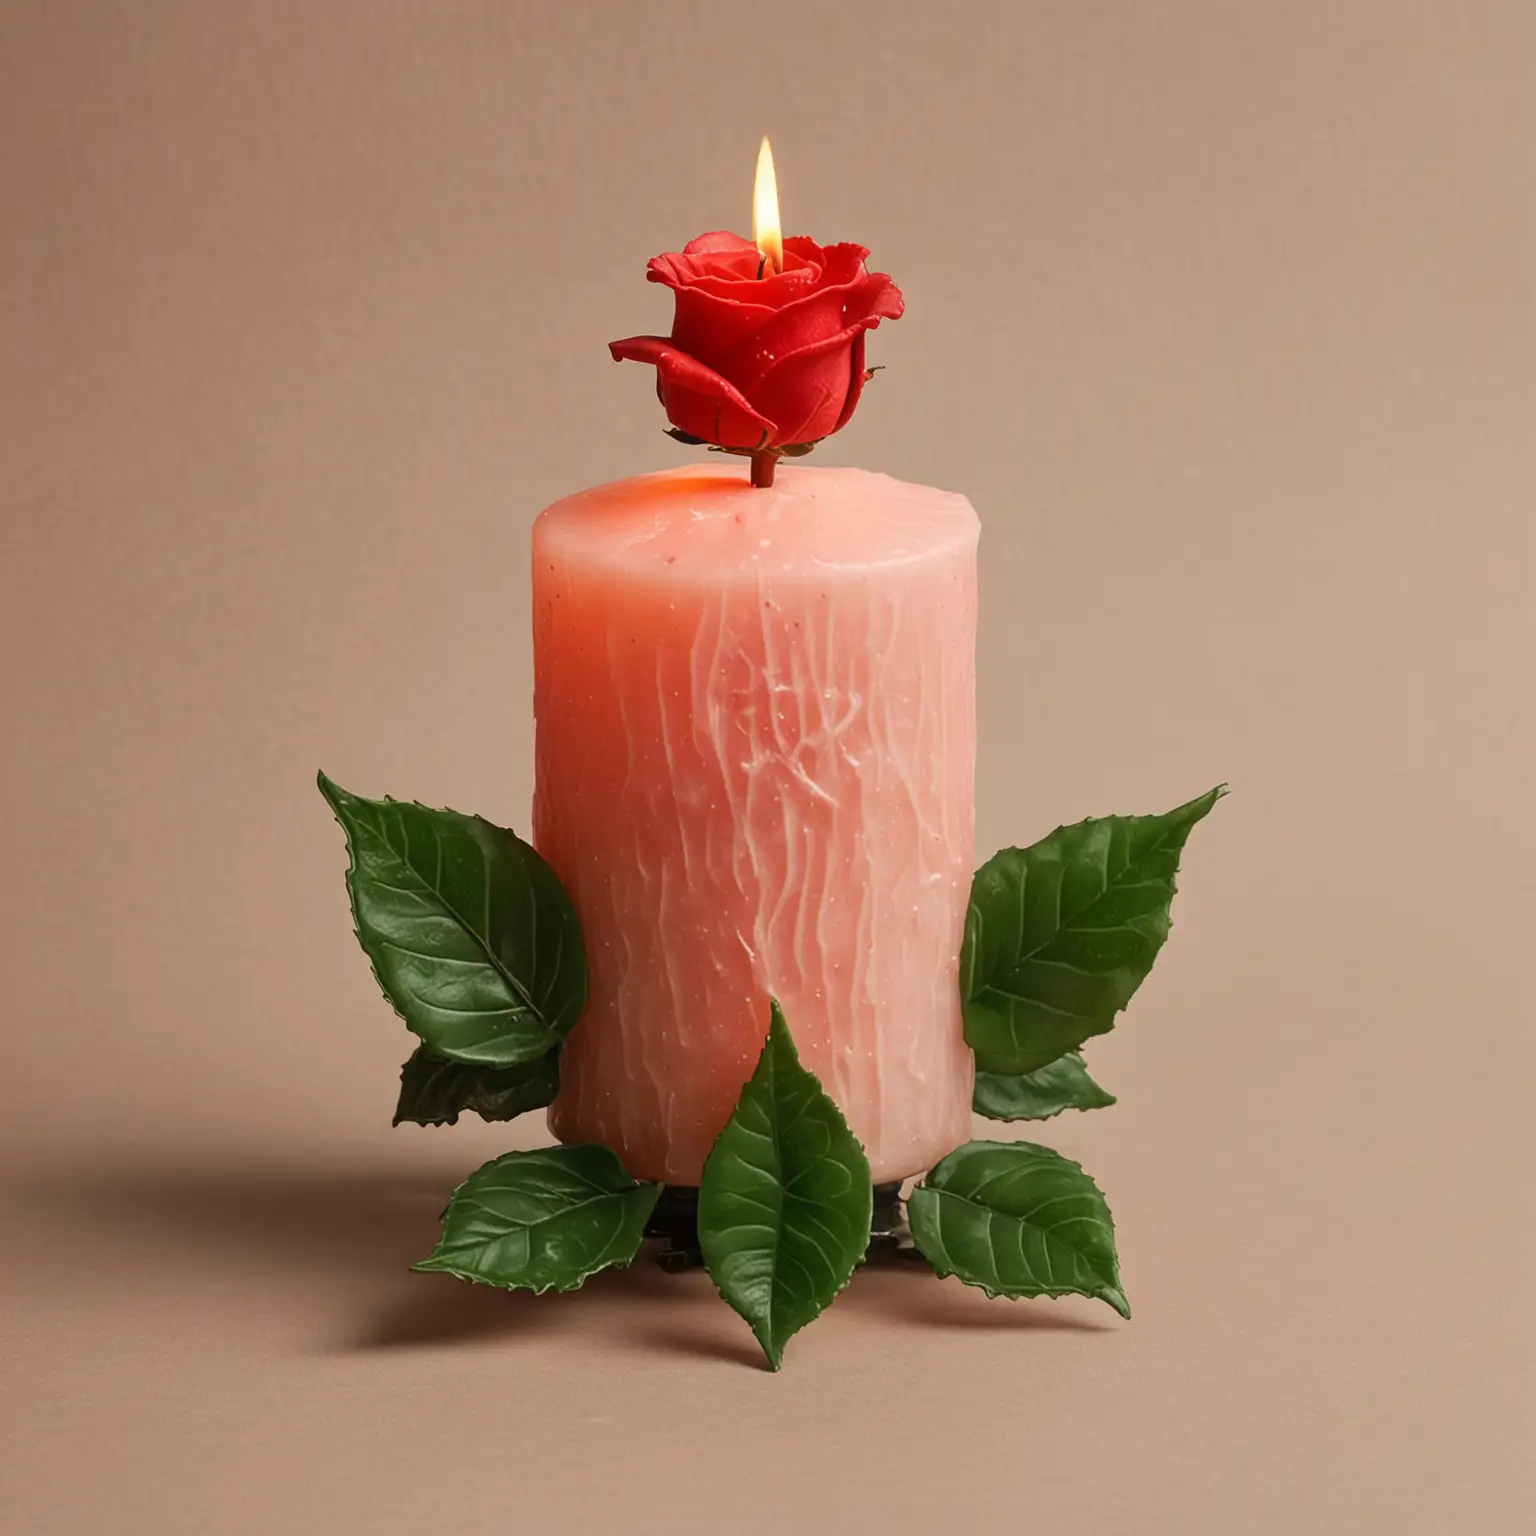 Romantic Candlelit Red Rose and Green Leaves Arrangement